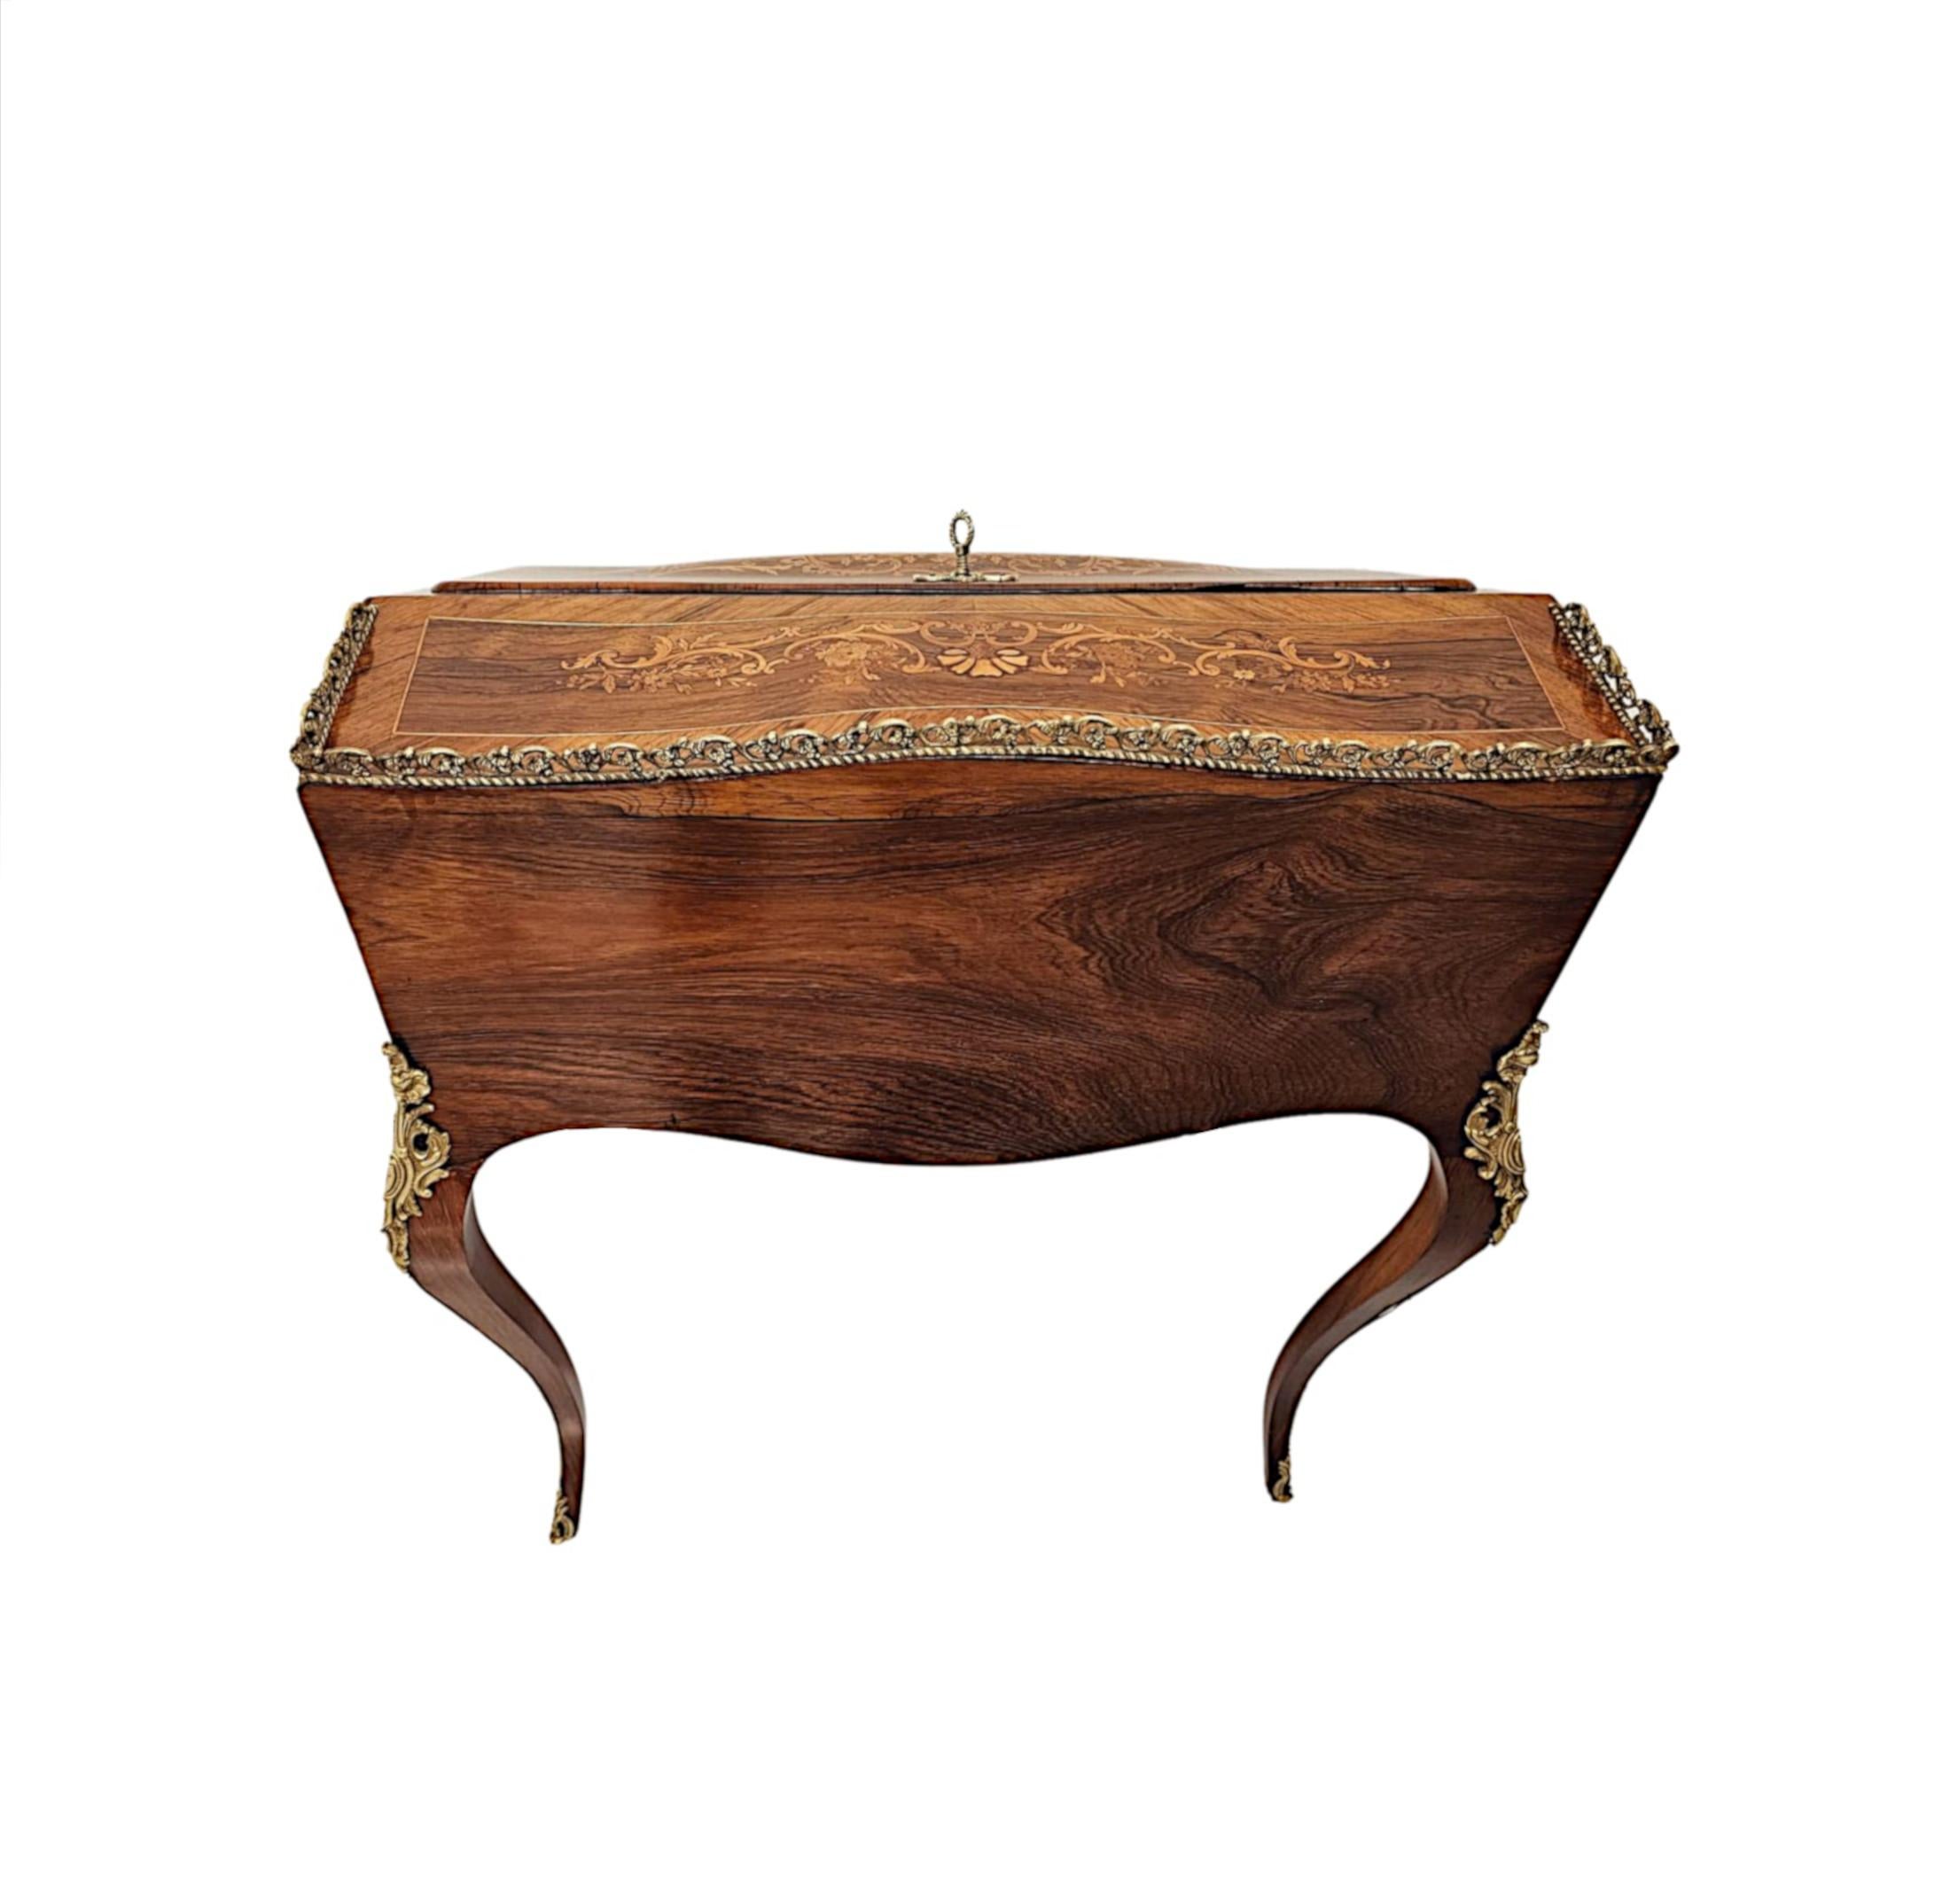 A Very Fine 19th Century Marquetry Inlaid Bureau Du Dame For Sale 4